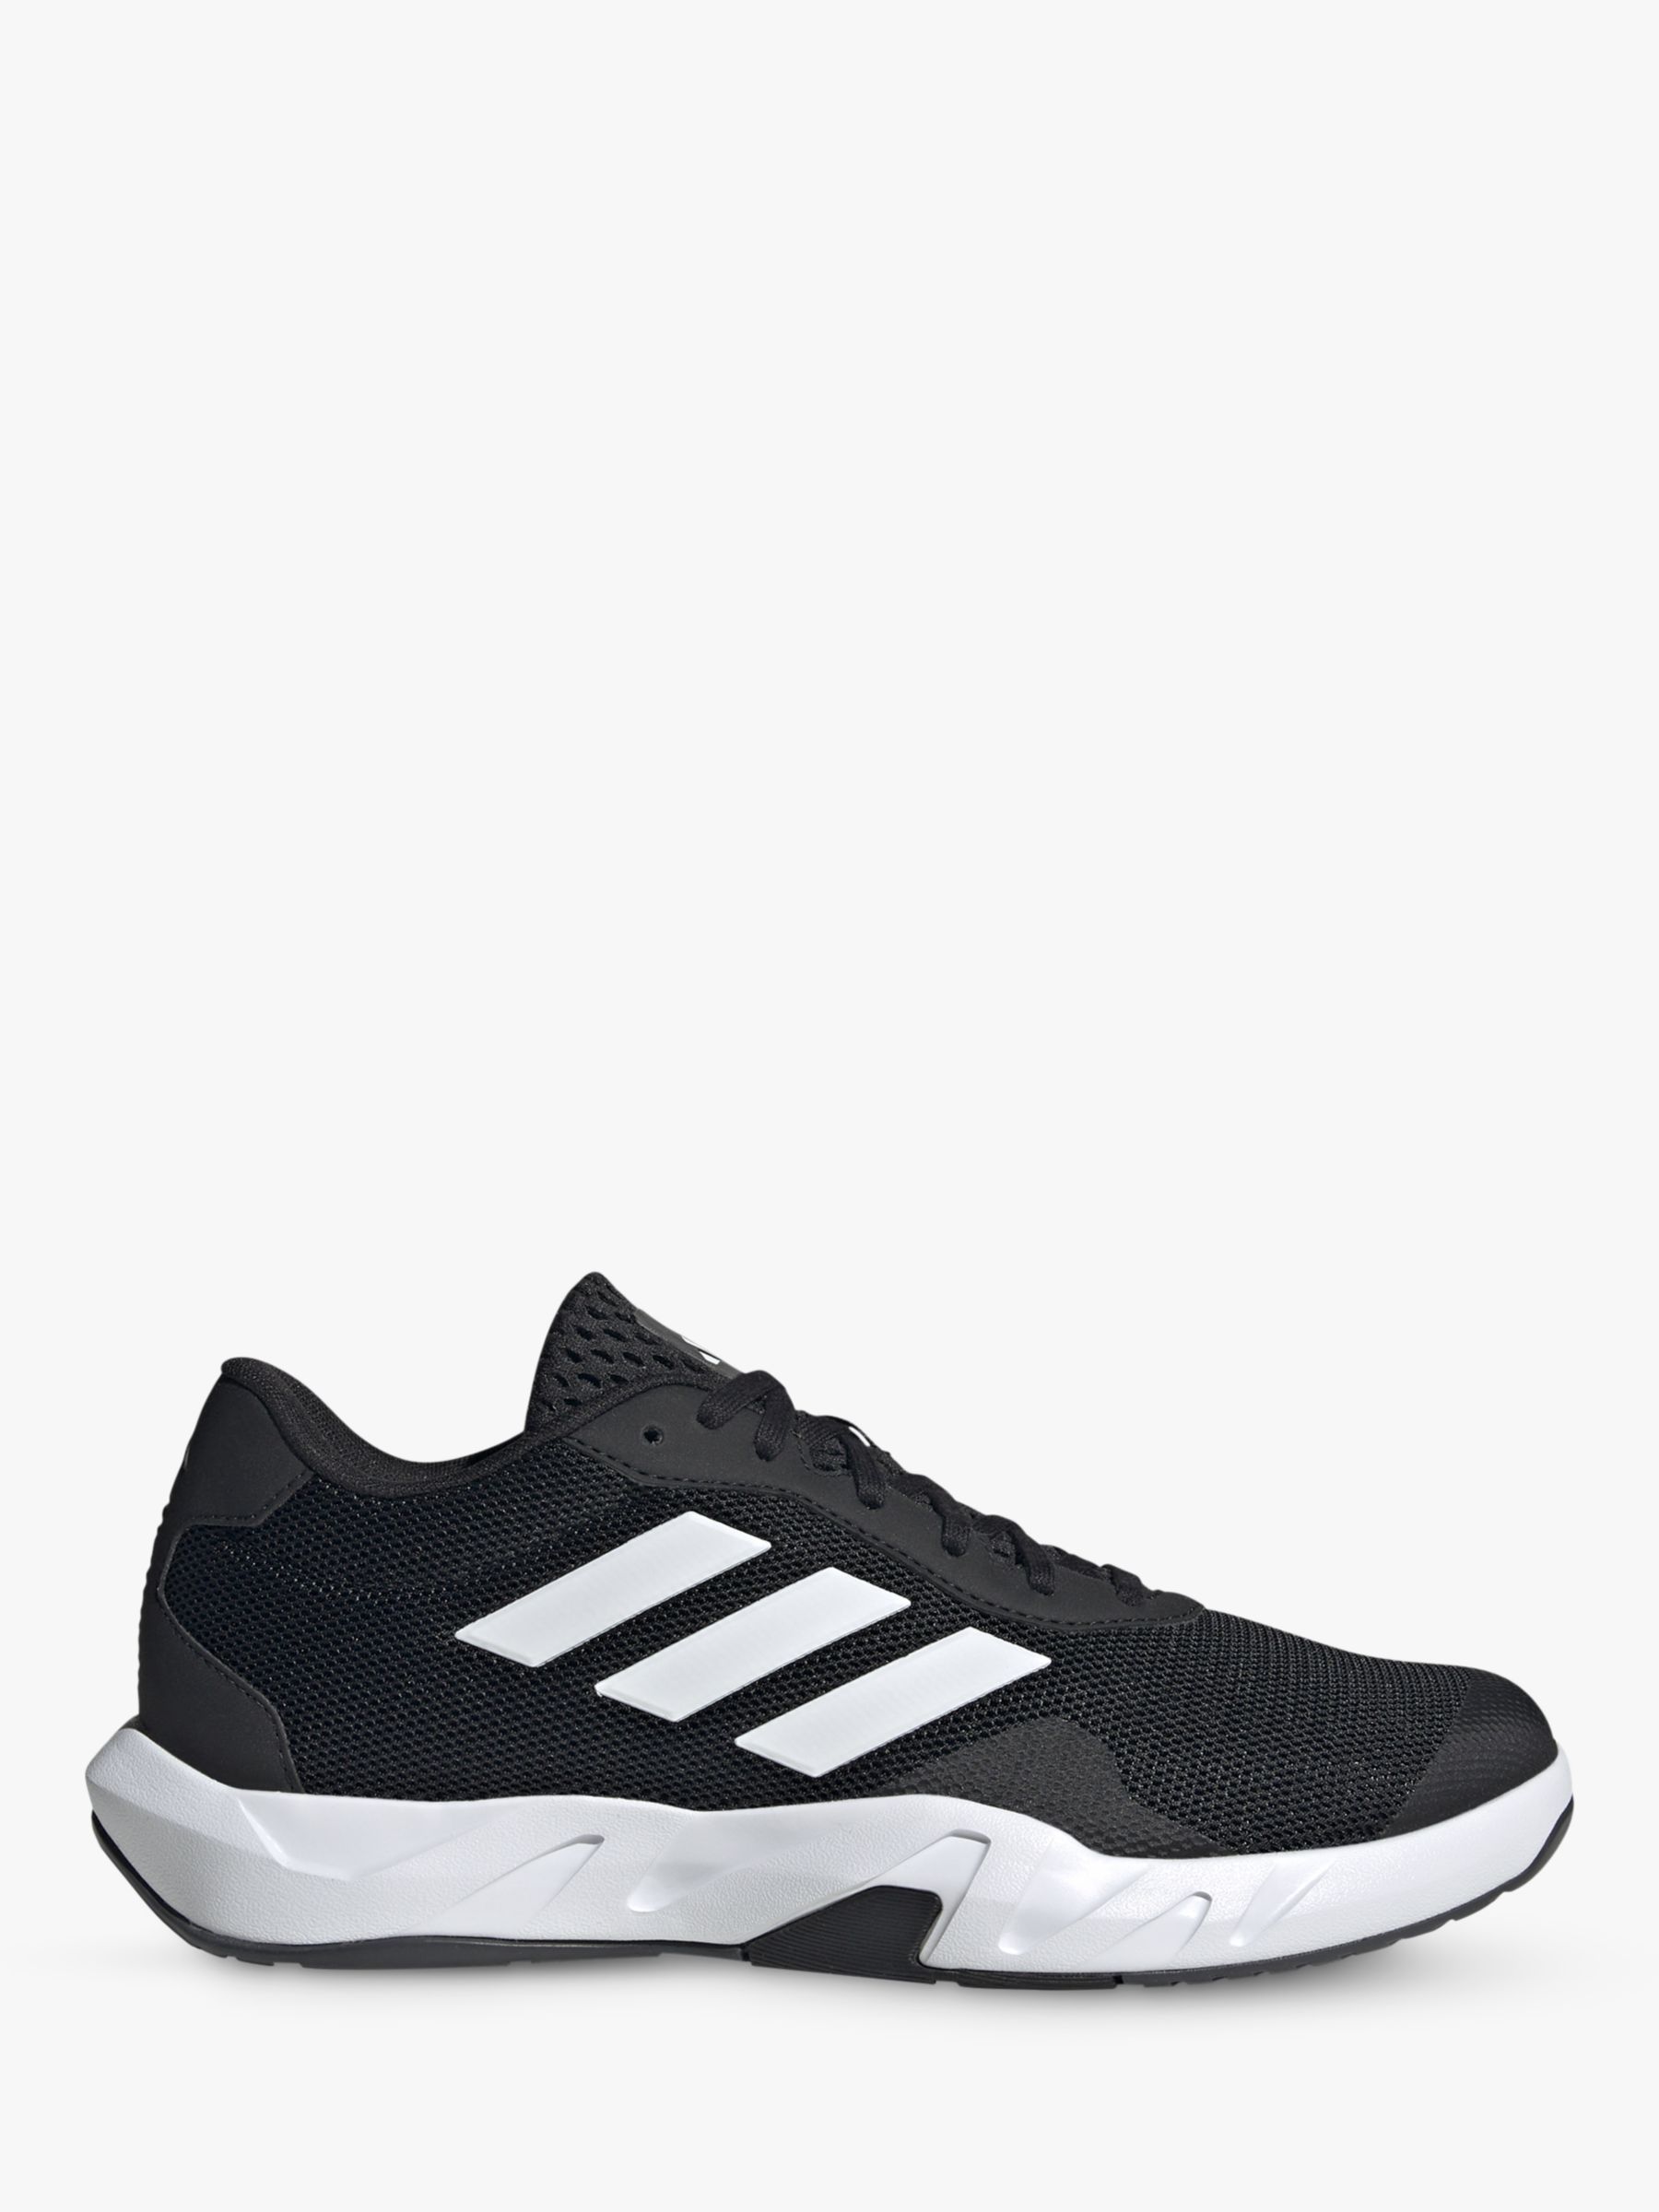 adidas AMPLIMOVE Trainers, Black/White at John Lewis & Partners